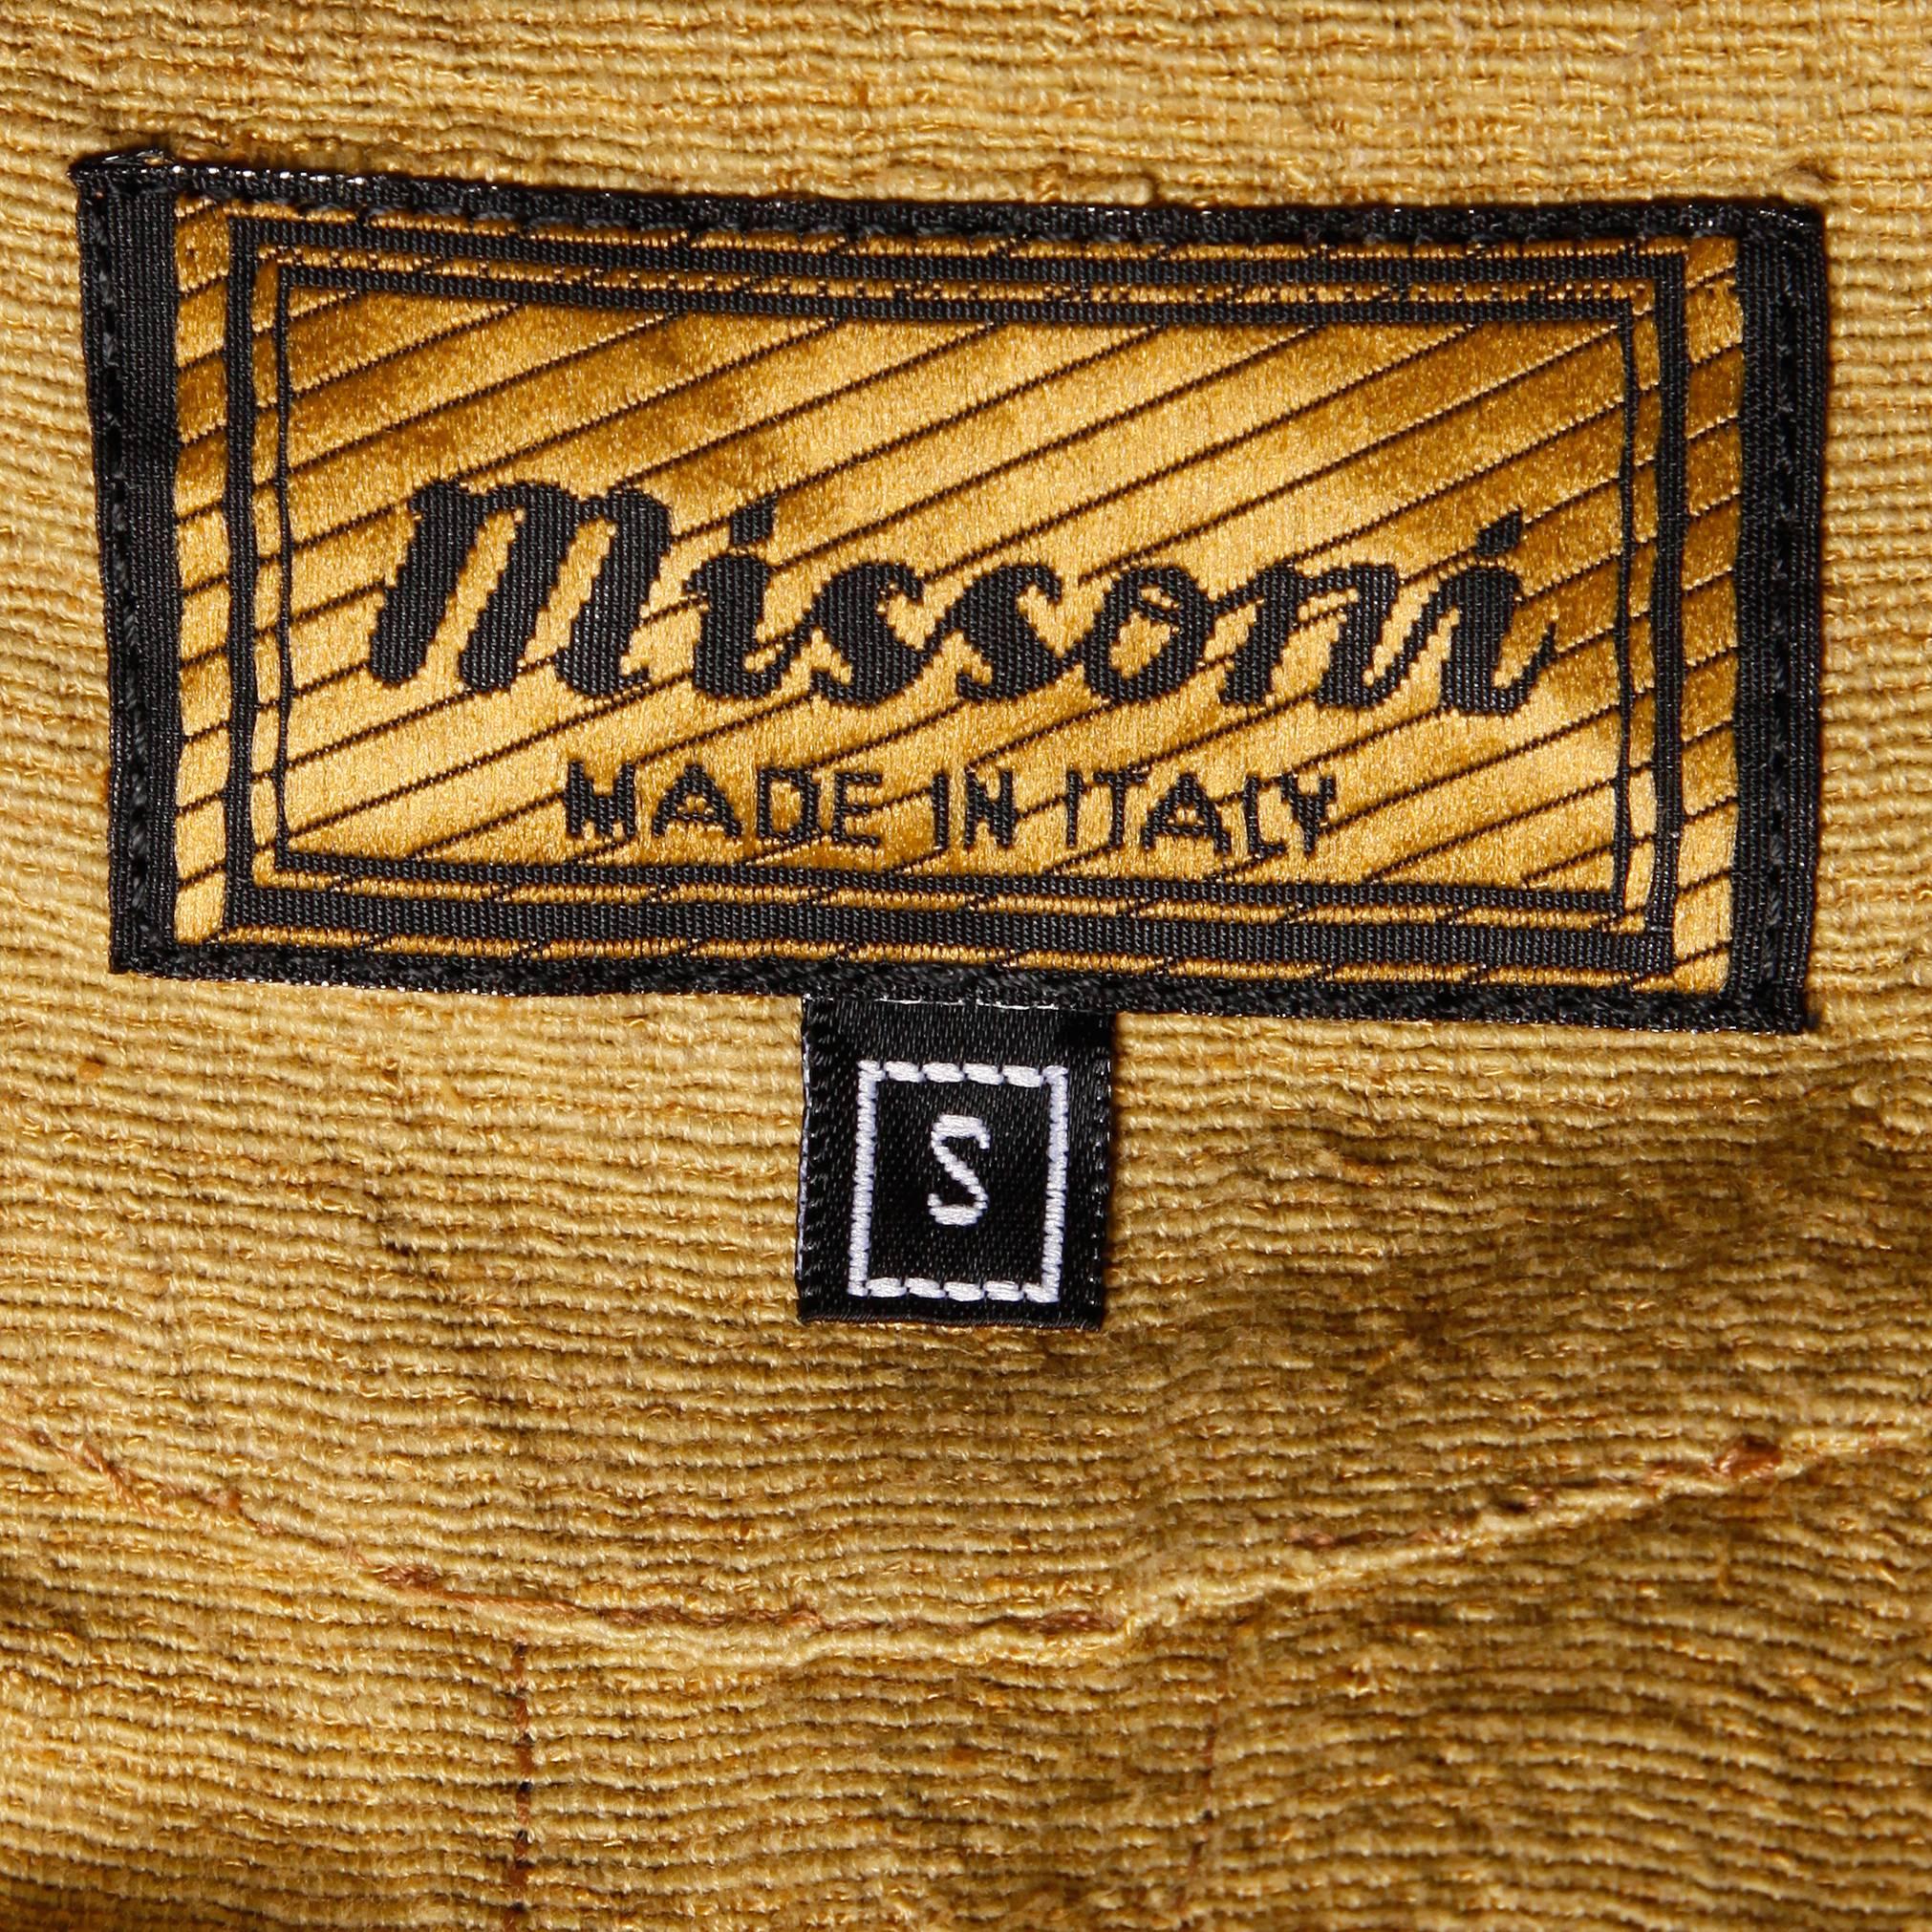 This is definitely the earliest Missoni label we have seen to date online or in person! We are dating this gorgeous dress to the very first years Ottavio and Rosita Missoni designed under the Missoni name during the early 1960s. The dress is mustard